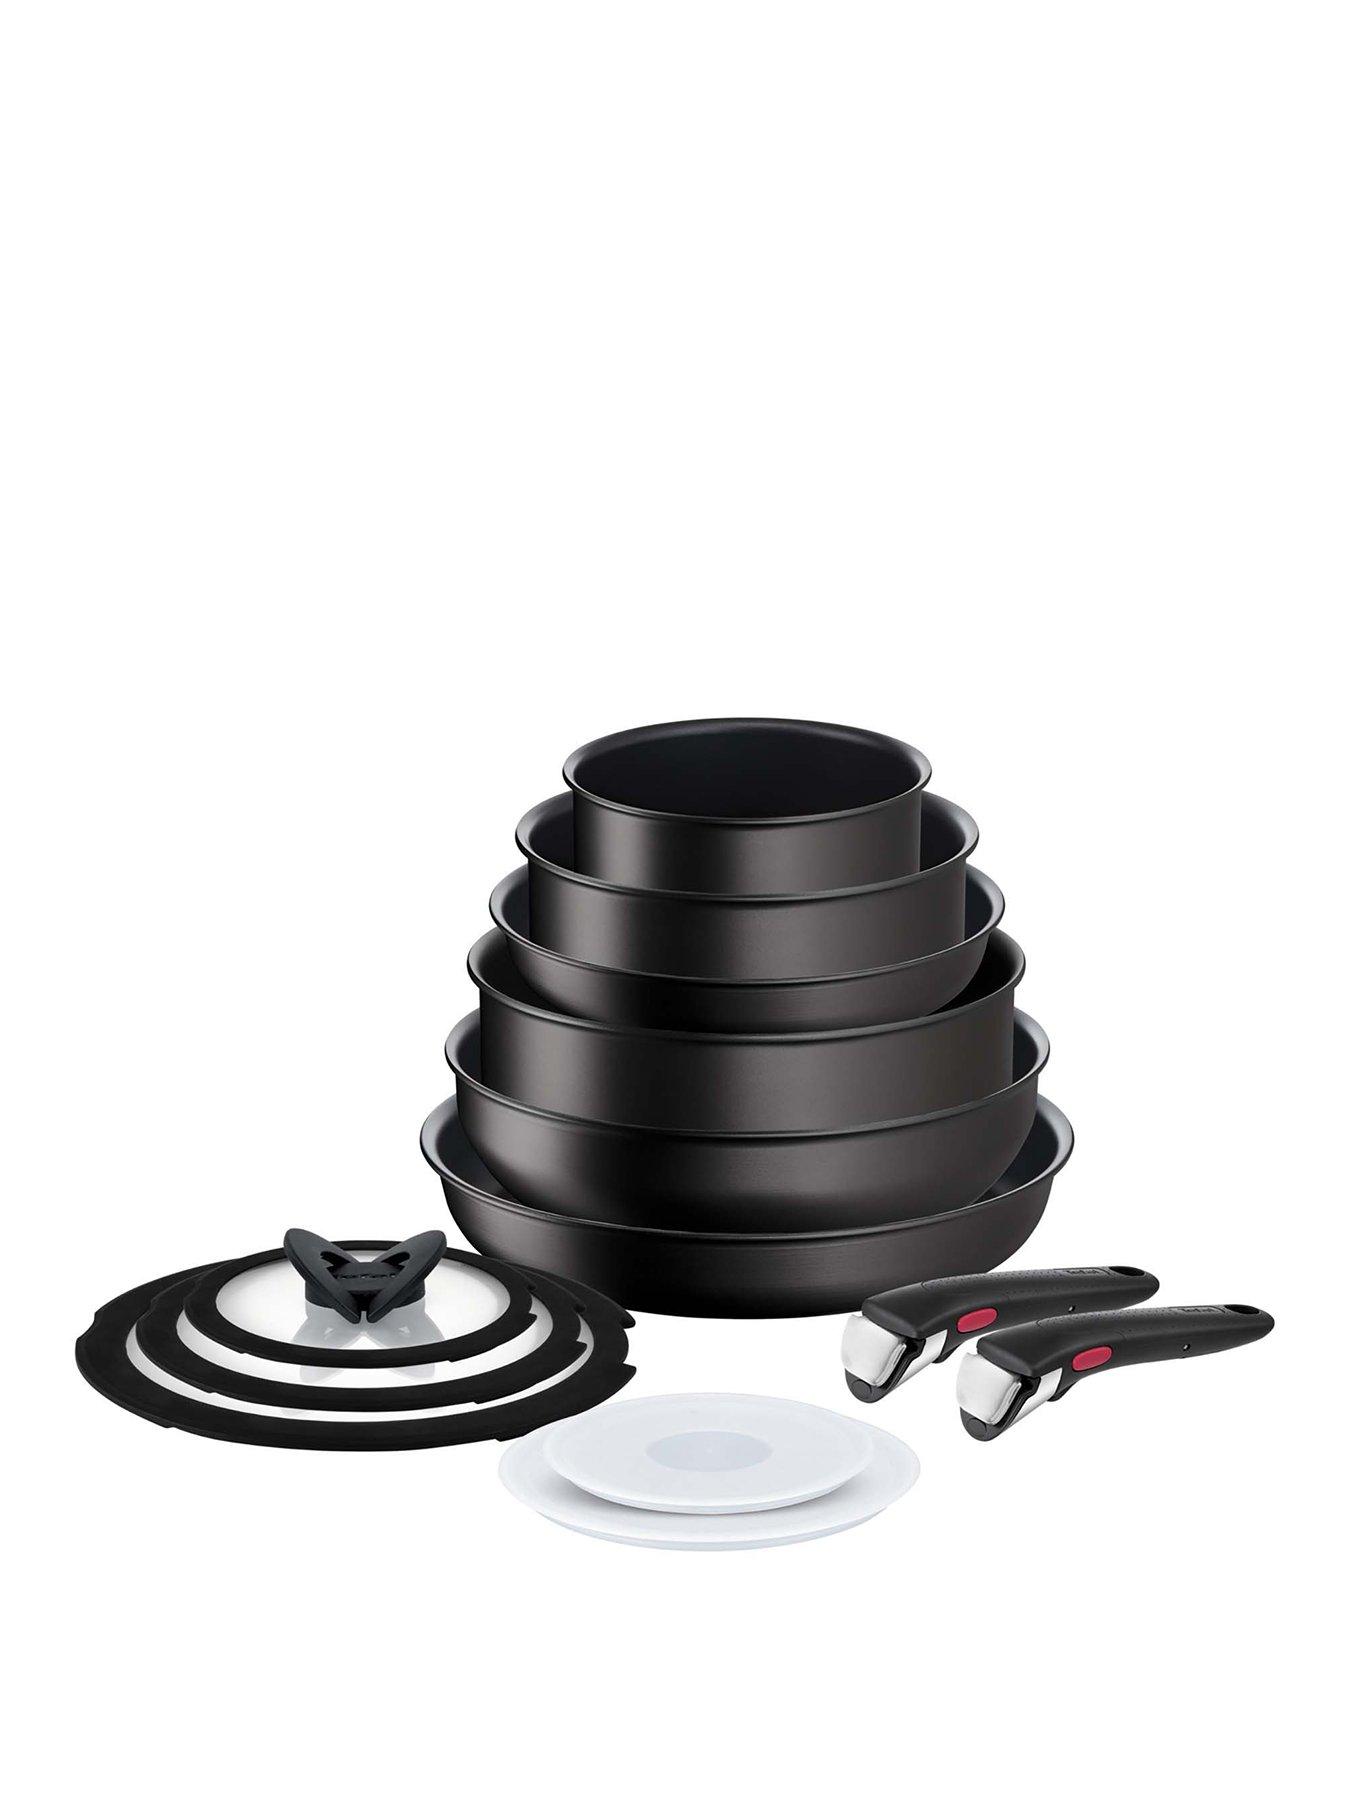 Tefal Jamie Oliver by Tefal Ingenio 9 Piece Removable Handle